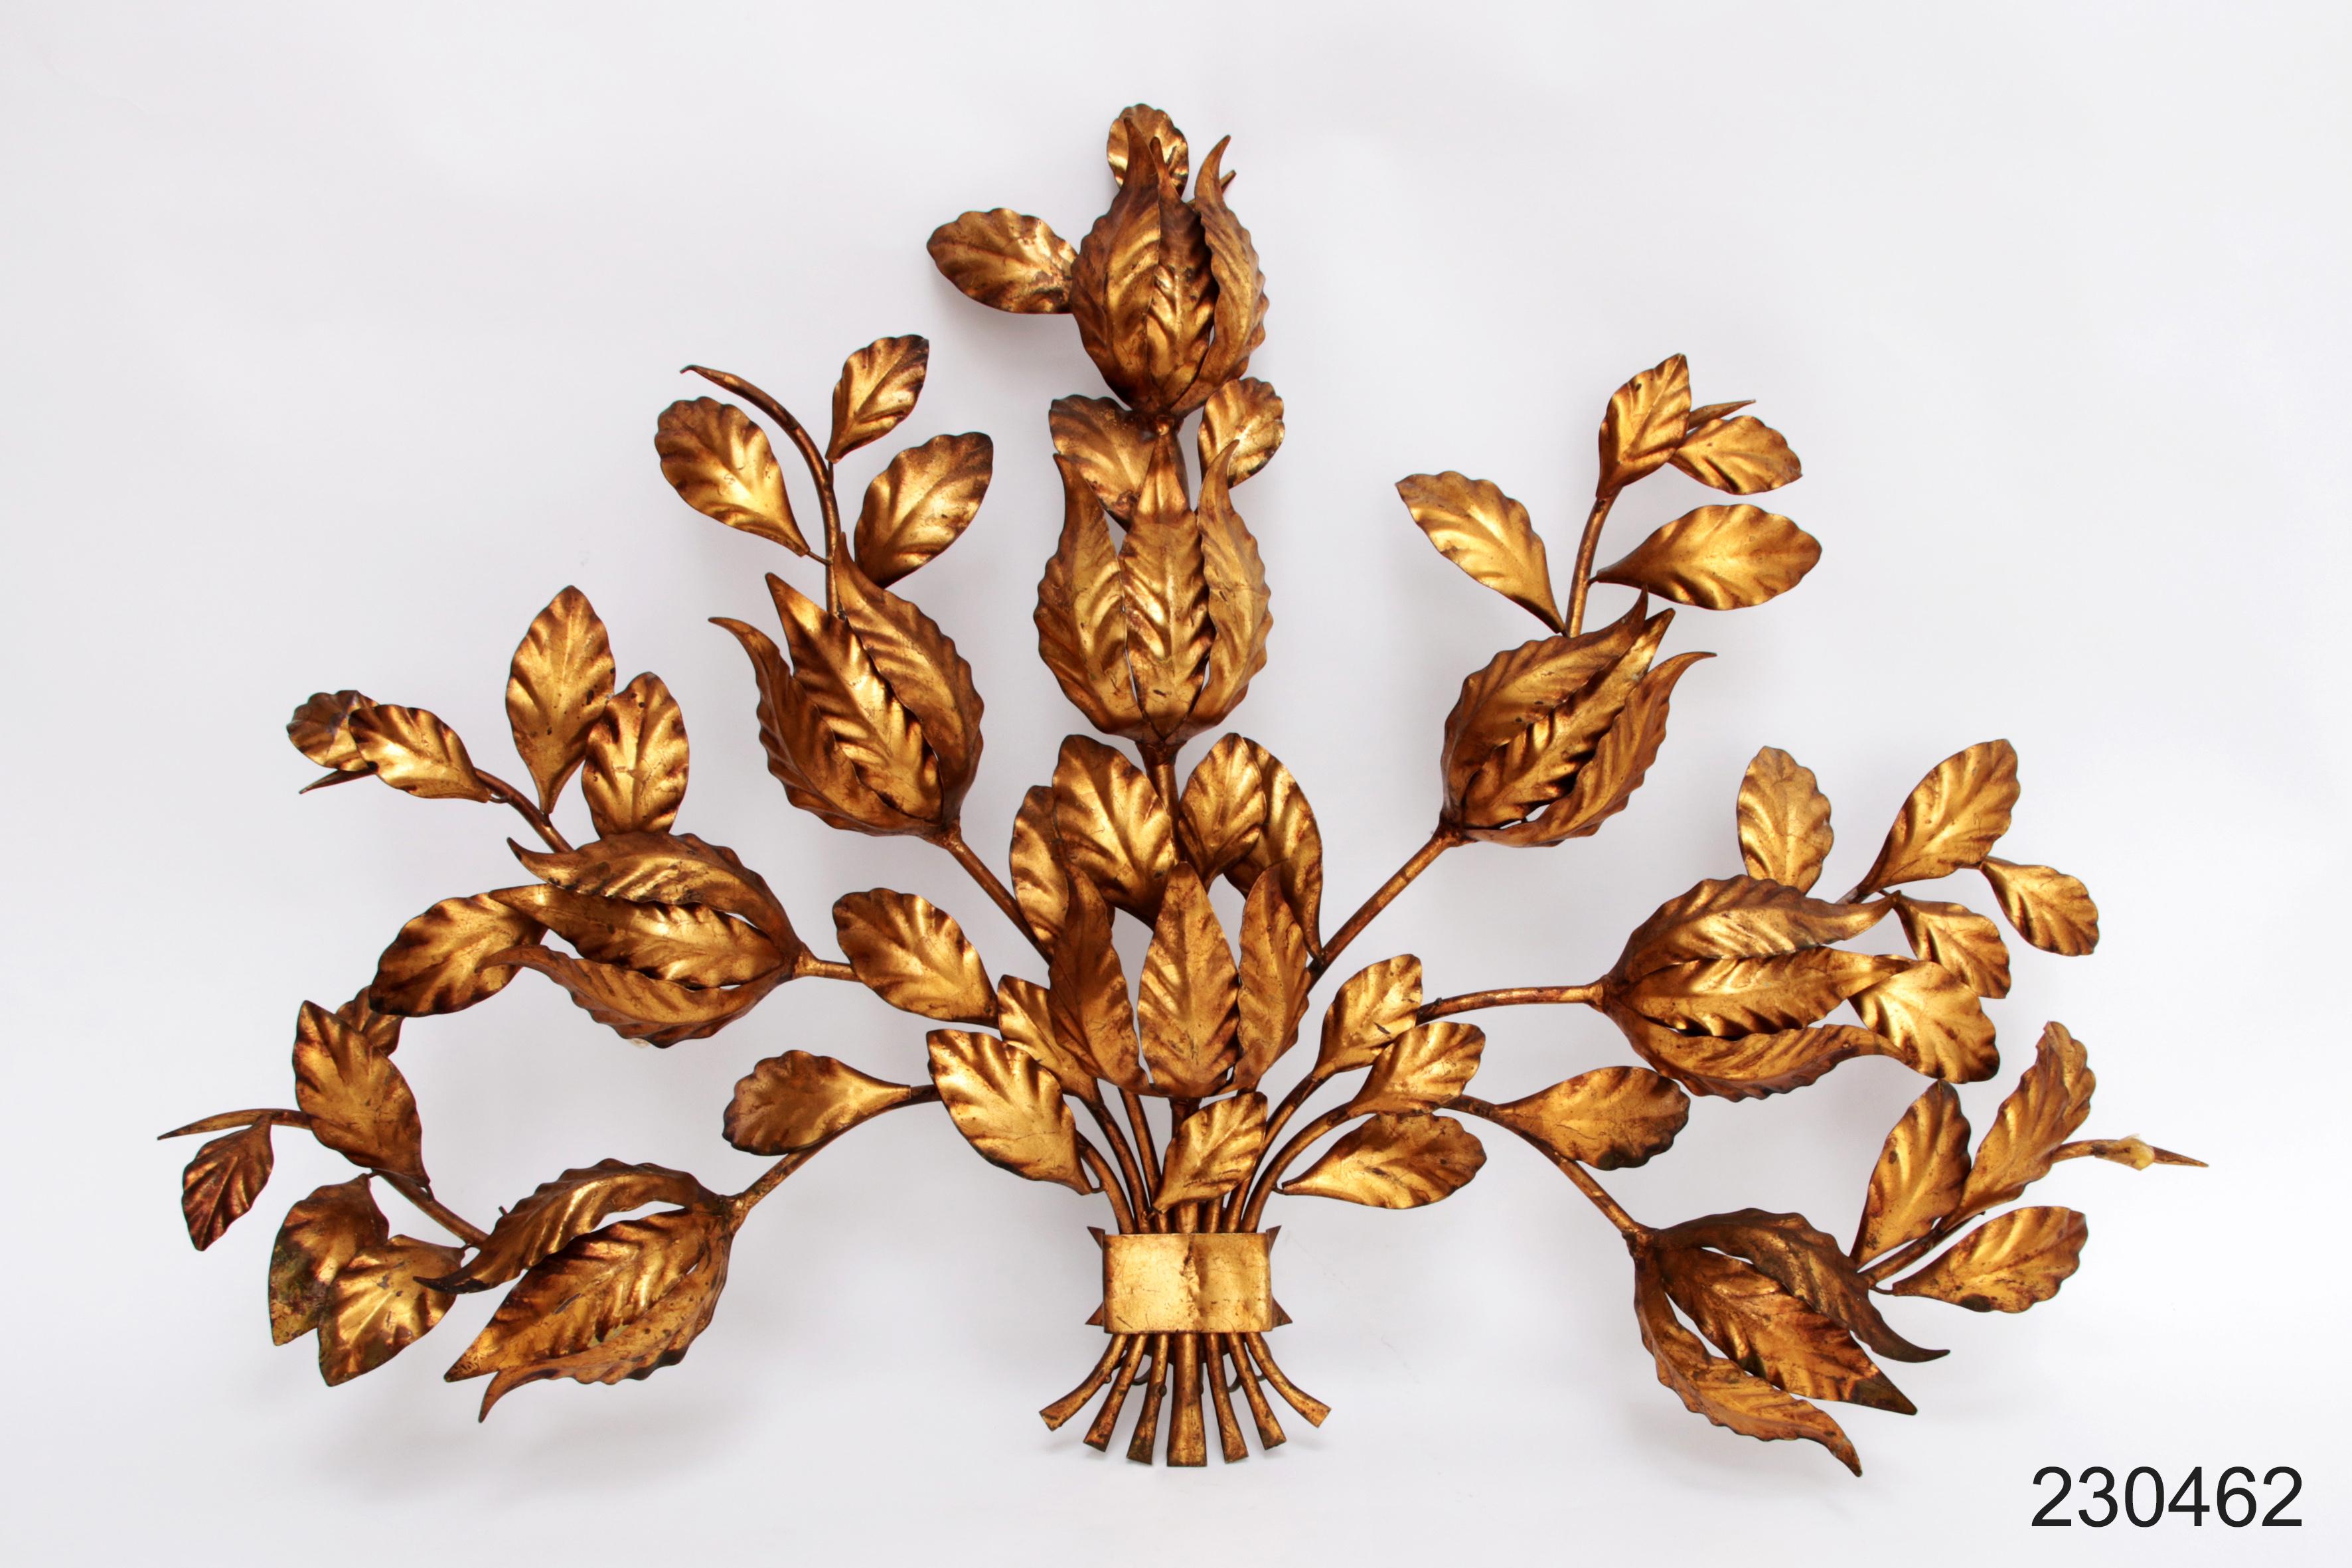 Pure luxury, this elegant vintage wall lamp from the 1960s.

Very decorative handmade wall lamp most likely designed by Hans Kögl or Willy Daro.

Material: gold-colored metal leaves.

Behind the leaves there is a beautiful reflecting light.

This